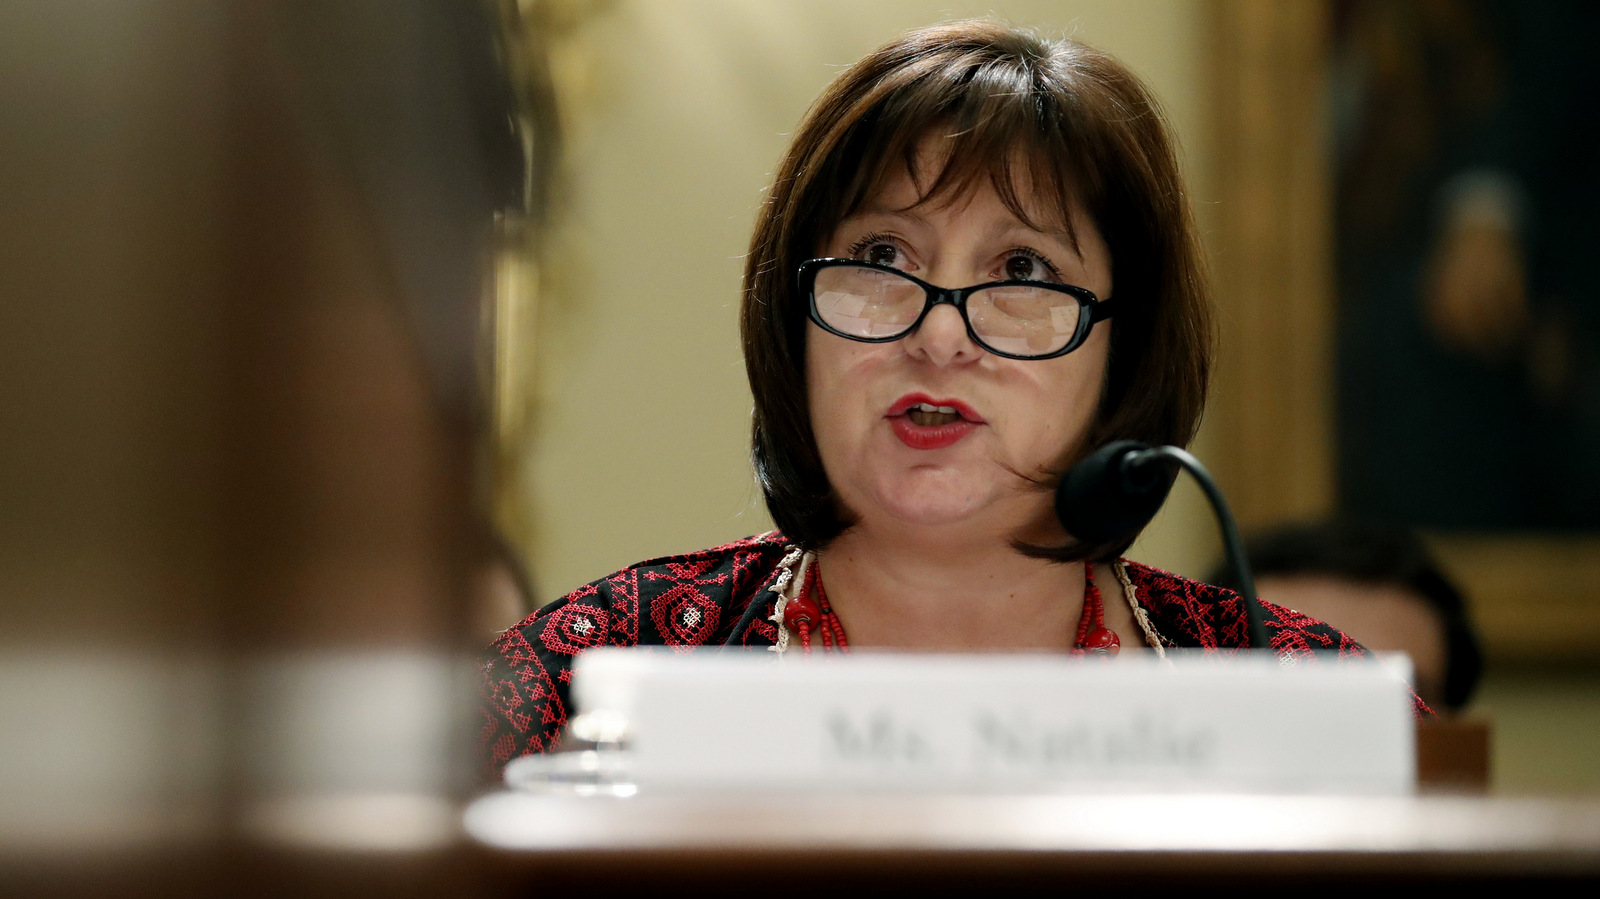 Natalie Jaresko, executive director, with the financial oversight and management board for Puerto Rico, speaks during a House Committee on Natural Resources hearing to examine challenges in Puerto Rico's recovery and the role of the financial oversight and management board, on Capitol Hill, Nov. 7, 2017 in Washington. (AP/Alex Brandon)